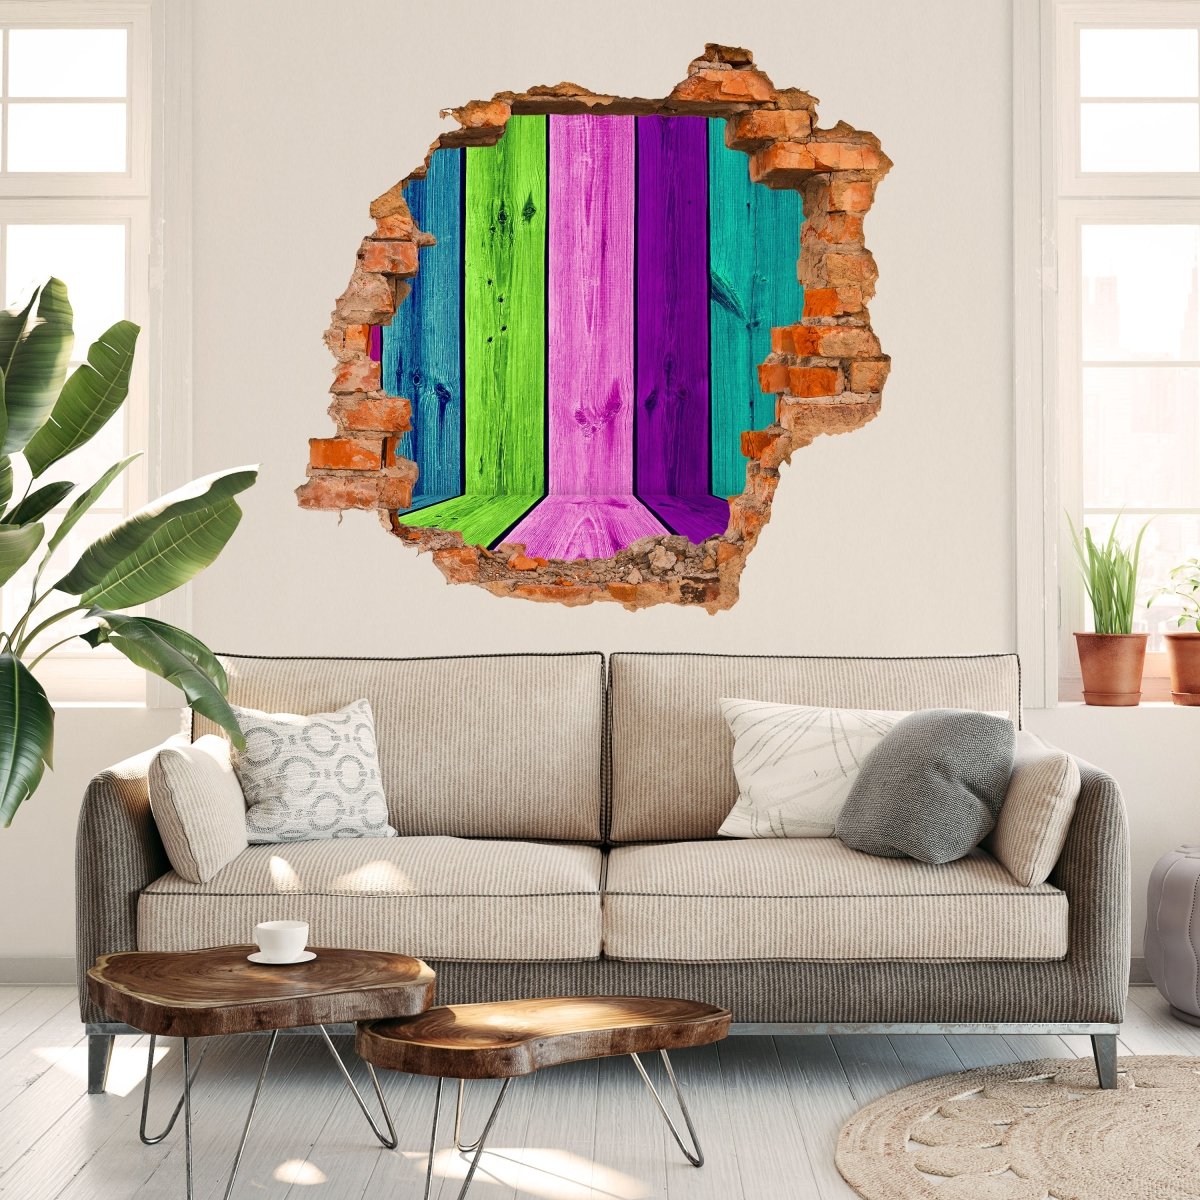 3D wall sticker Multicolored wooden room - Wall Decal M1000